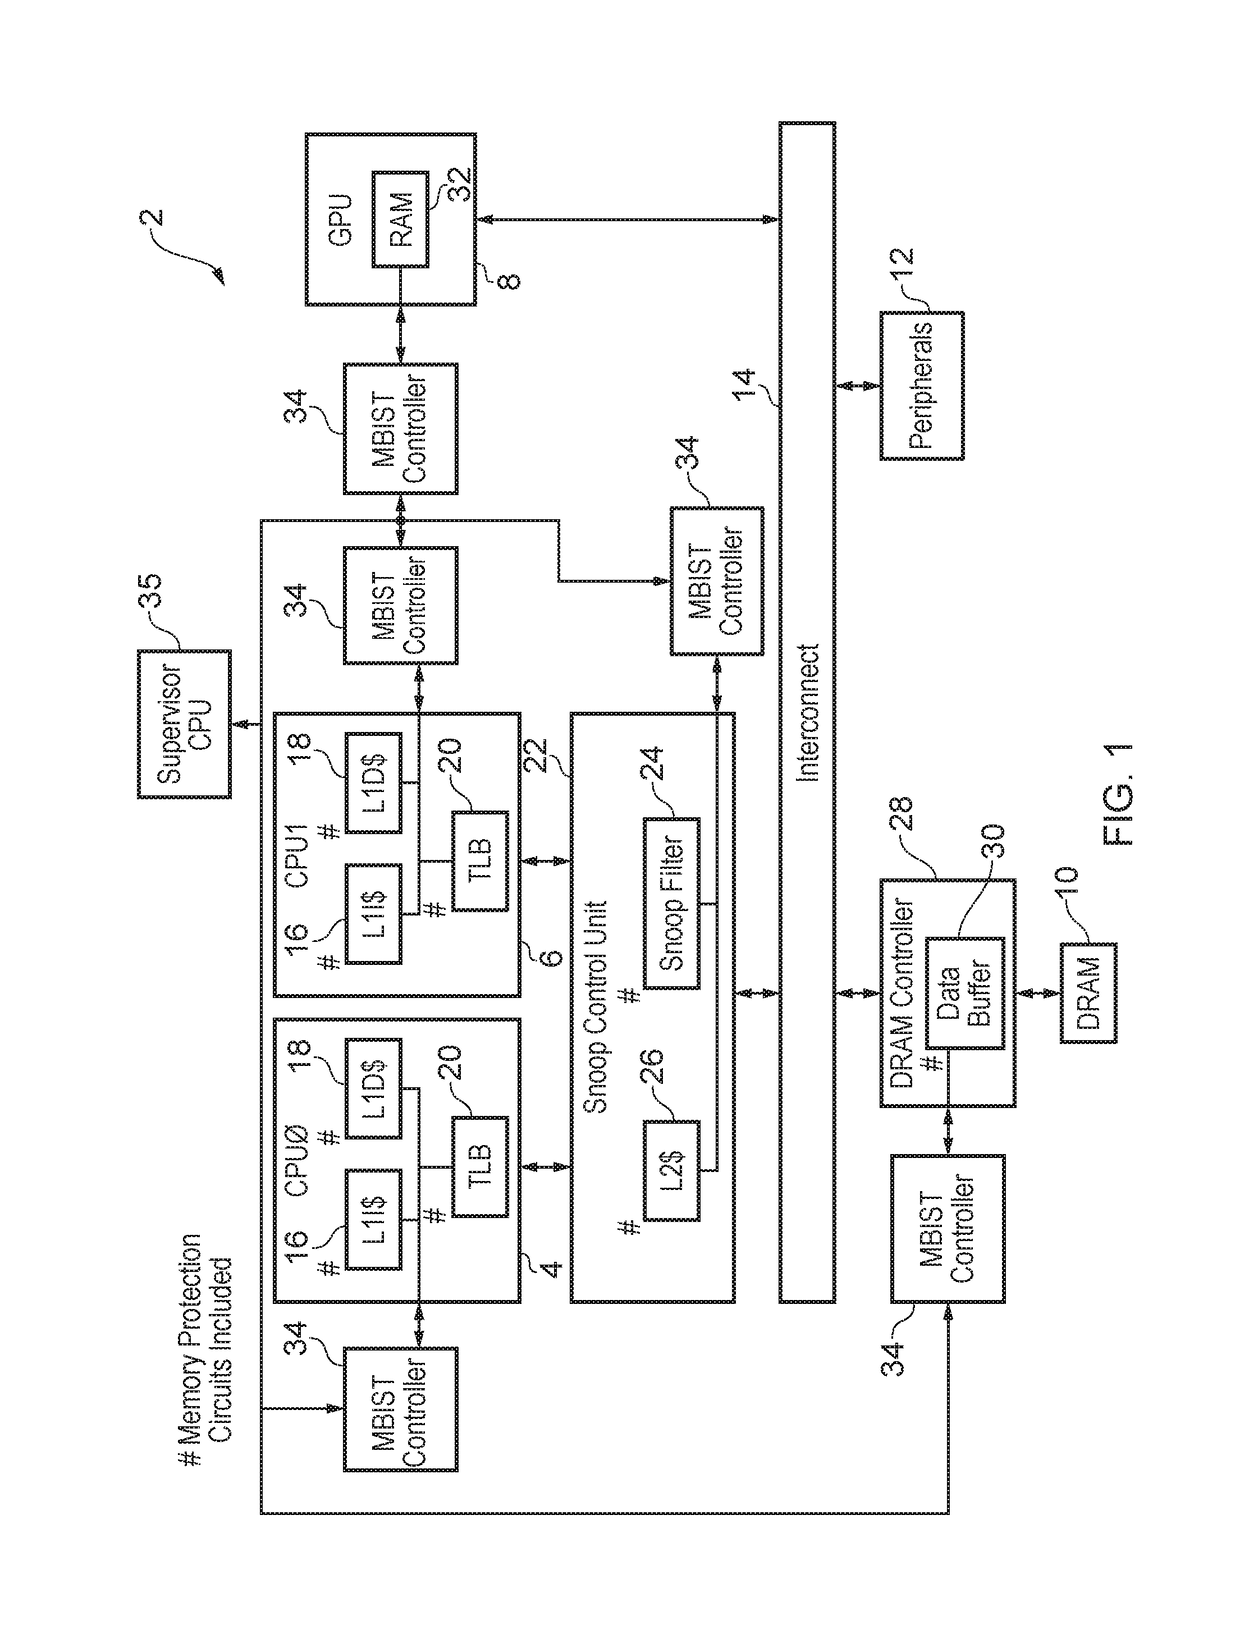 Memory protection circuitry testing and memory scrubbing using memory built-in self-test